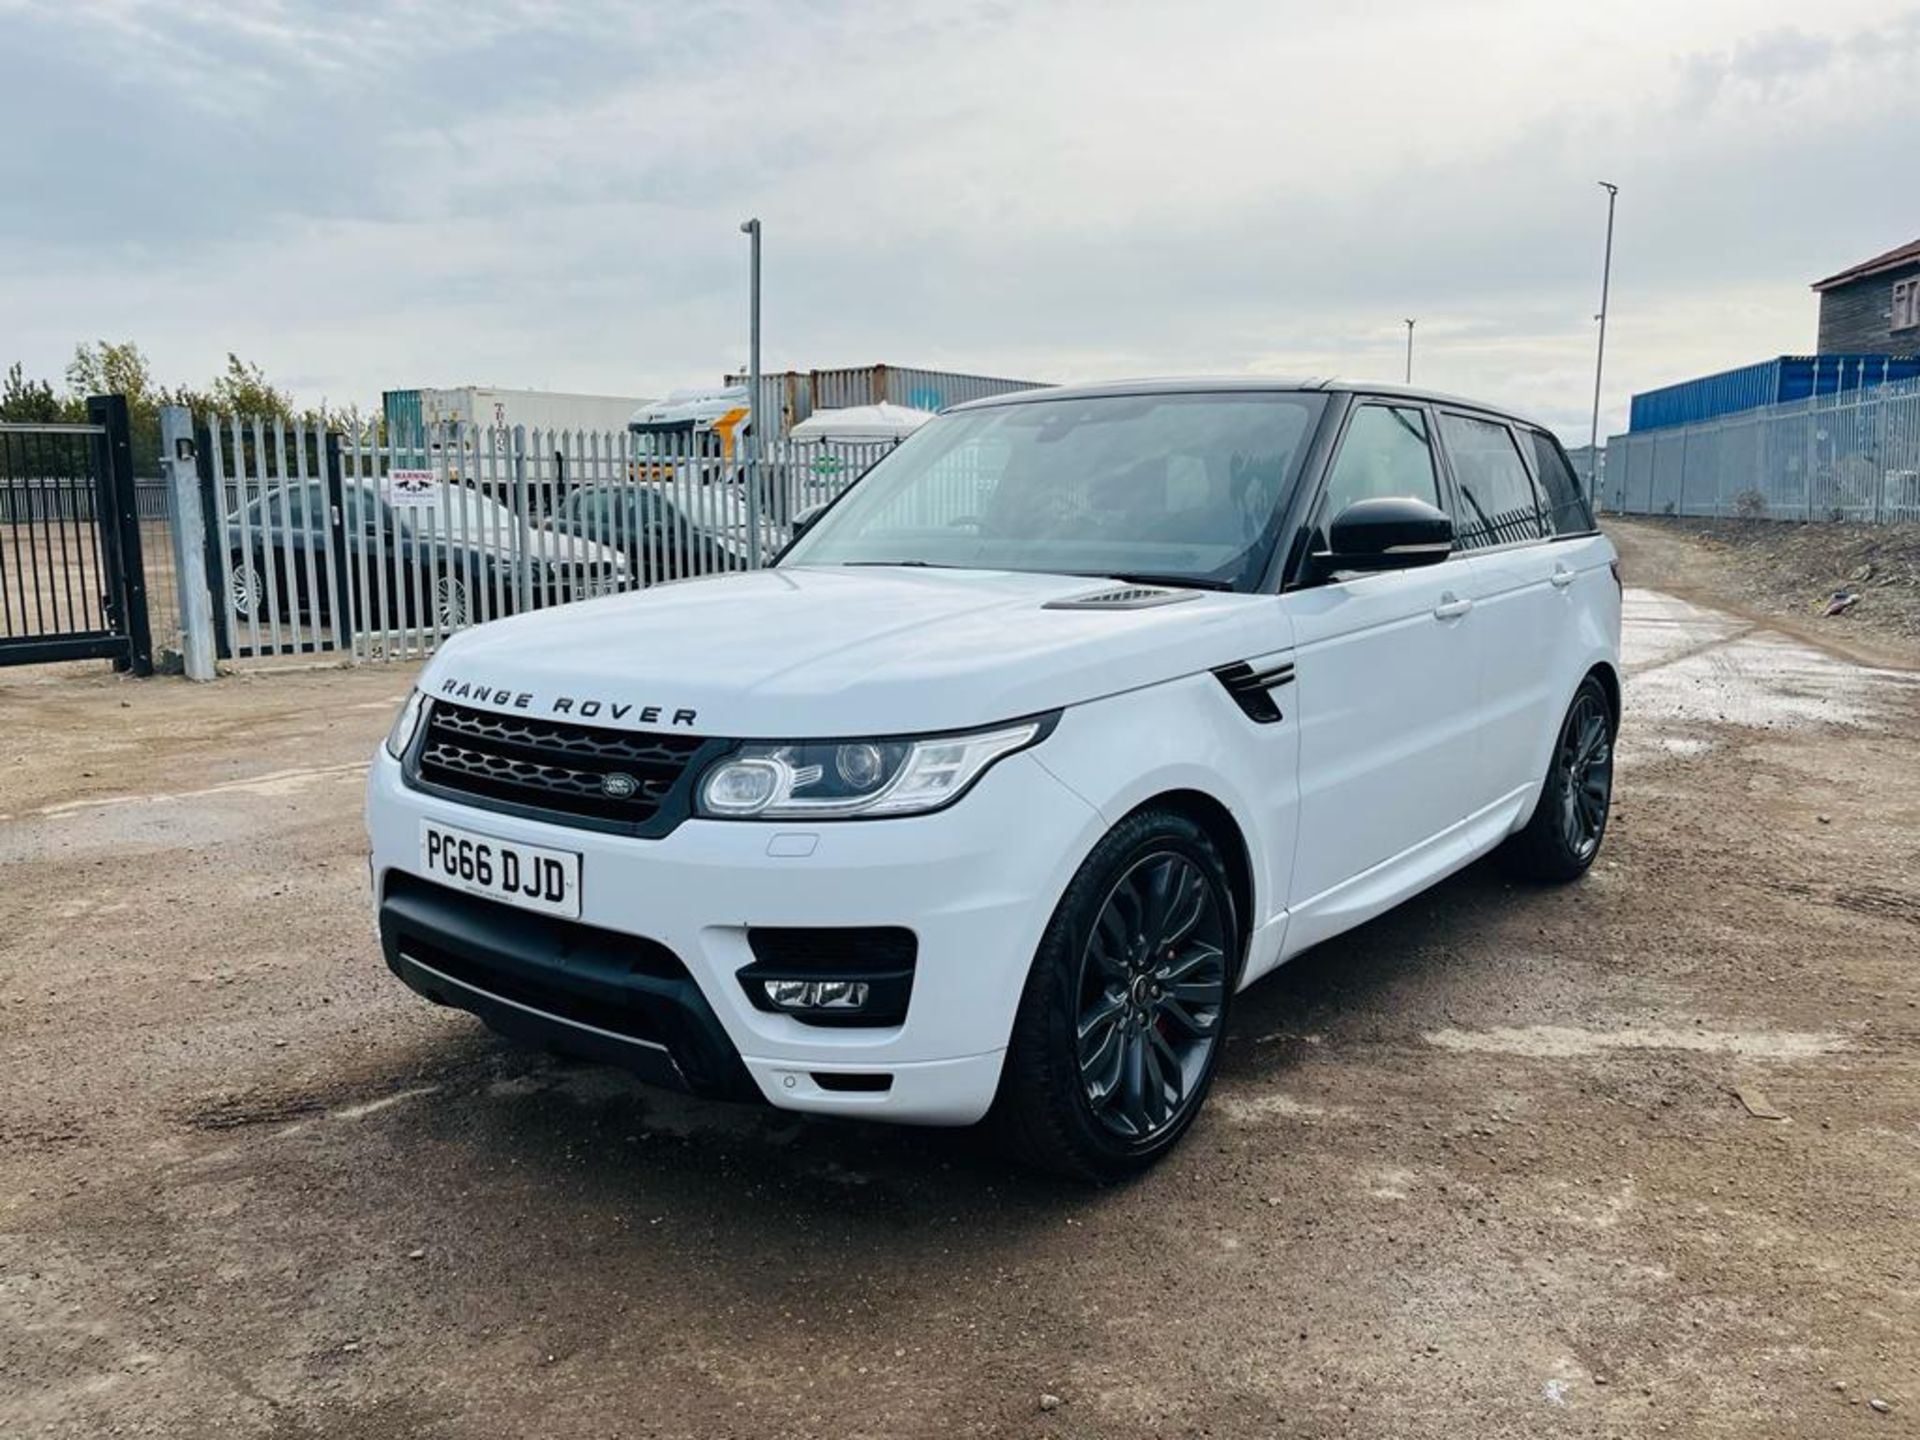 ** ON SALE ** Land Rover Range Rover Sport 3.0 SDV6 306 HSE DYNAMIC 4WD 2017 (66 Reg) - A/C - Image 14 of 32